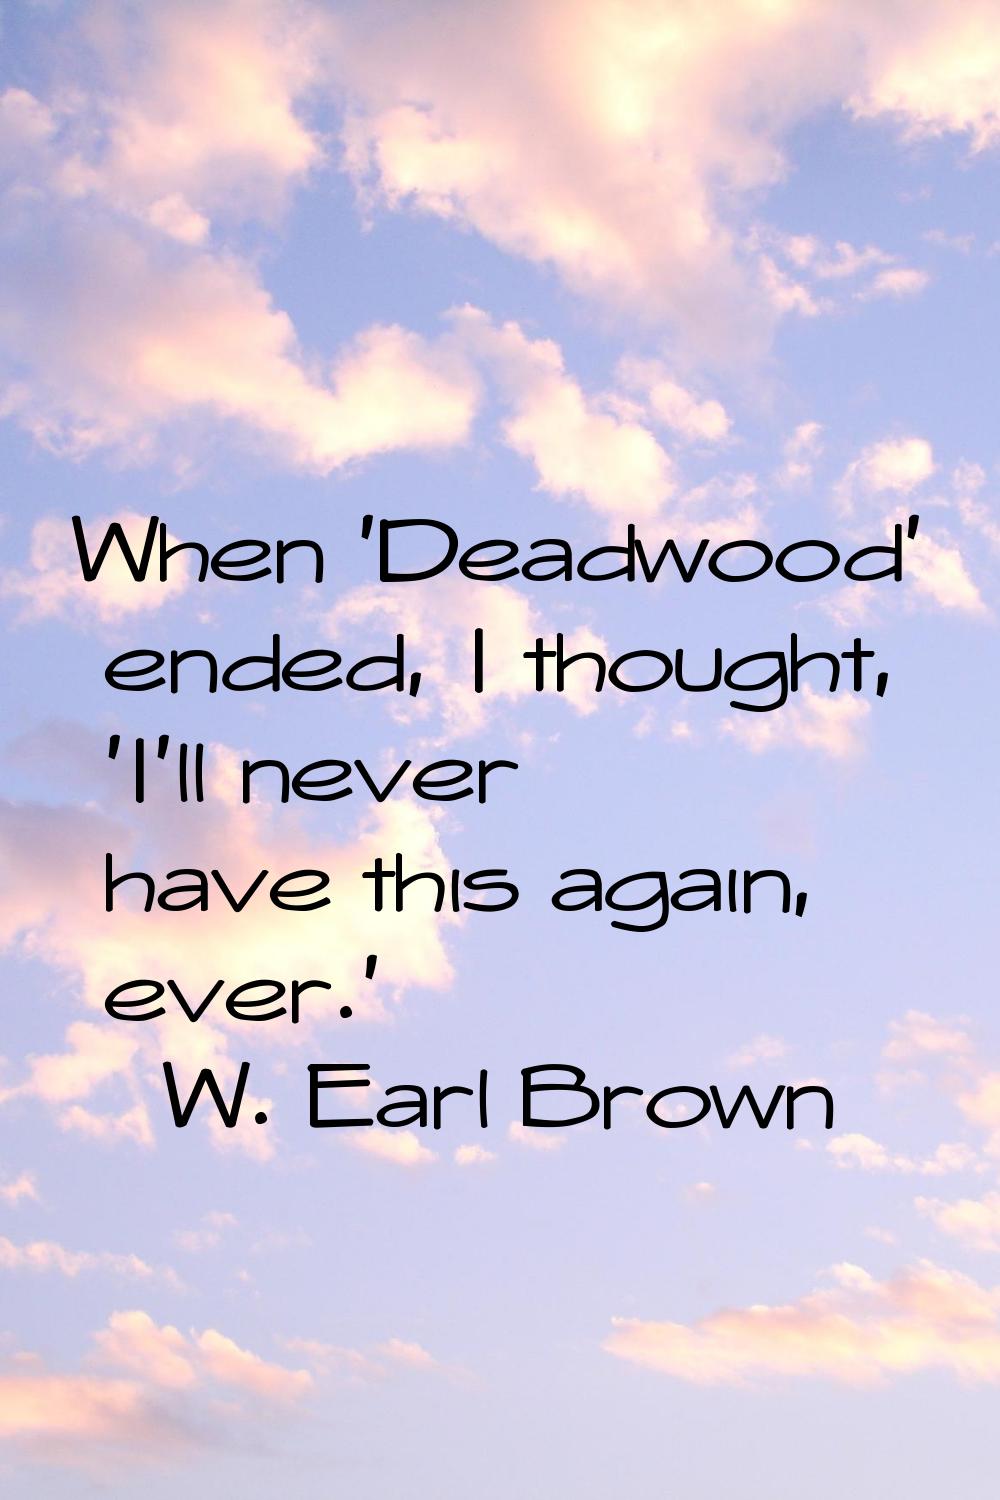 When 'Deadwood' ended, I thought, 'I'll never have this again, ever.'